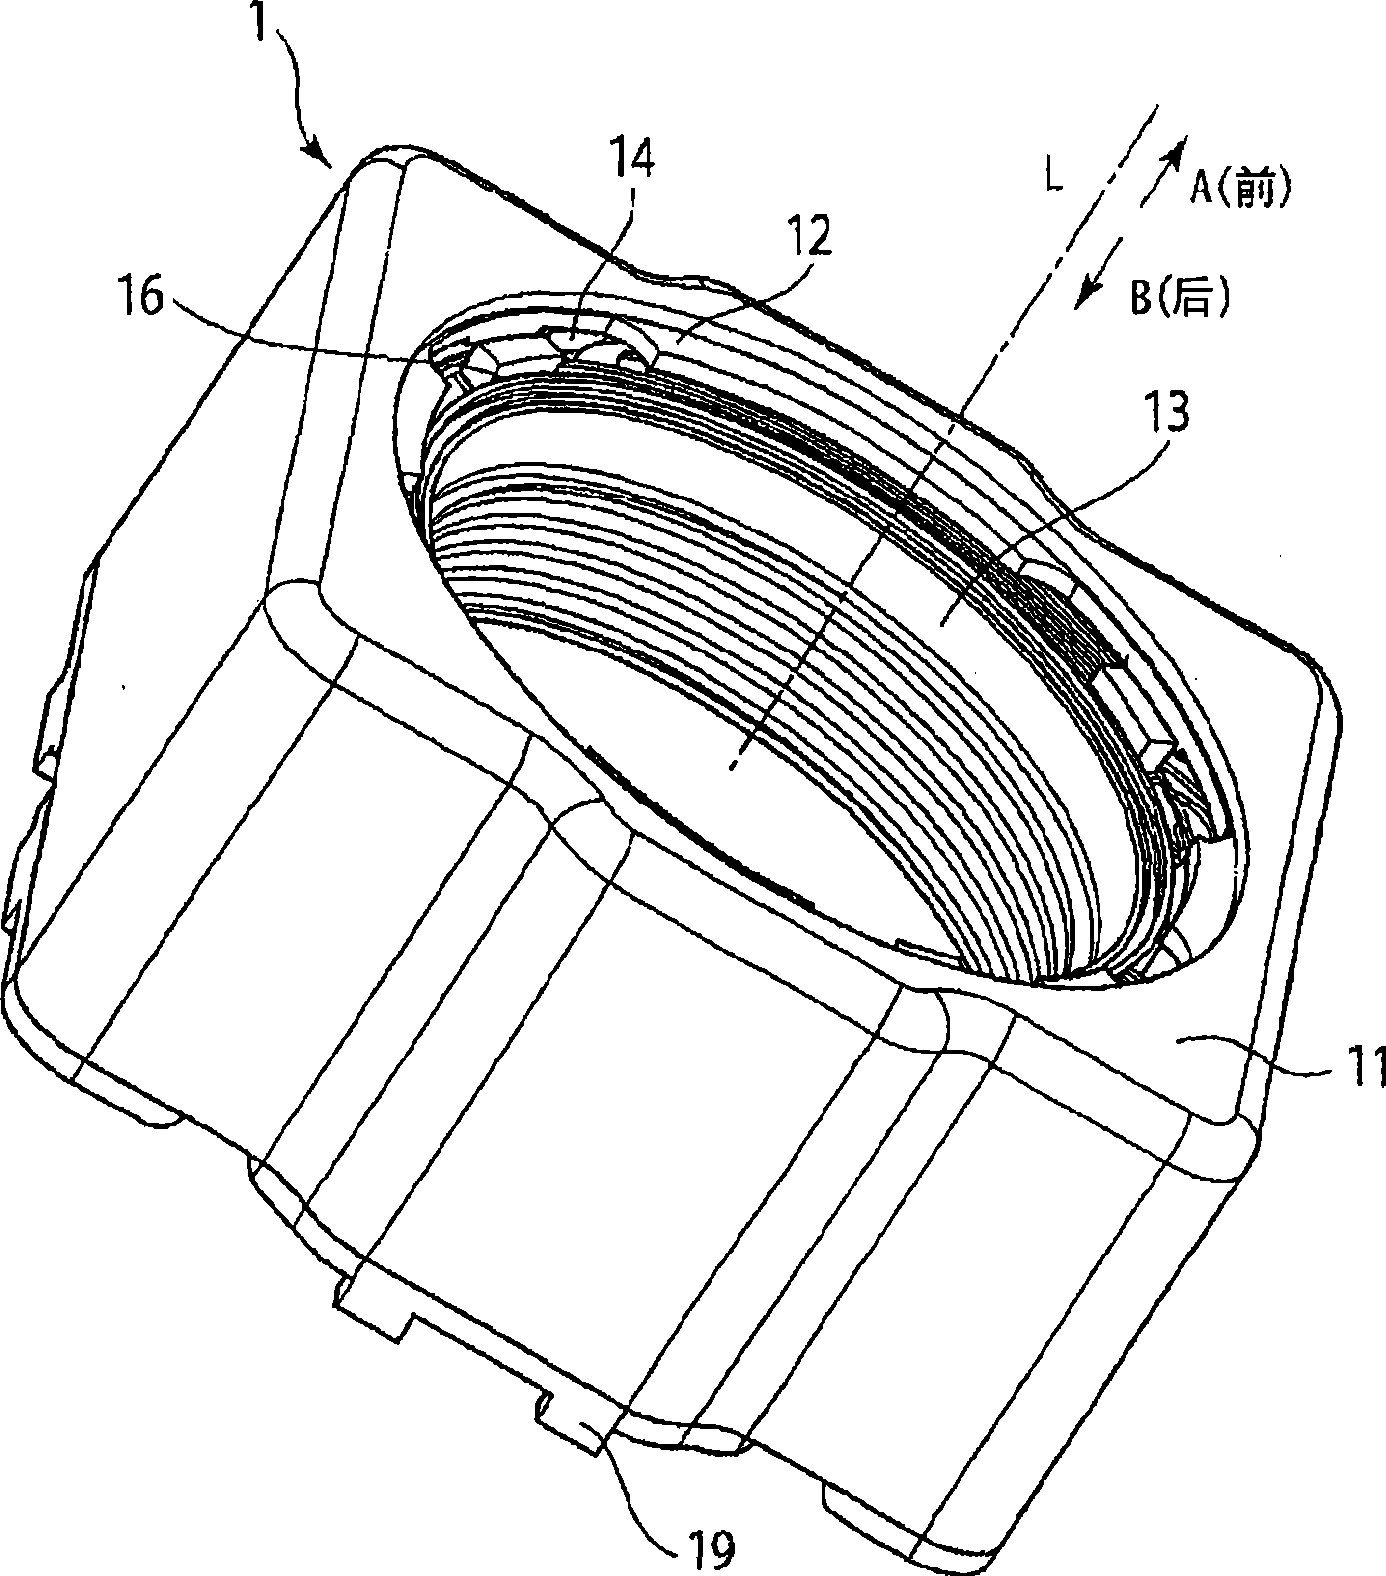 Lens drive device, spring member and manufacturing methods therefor